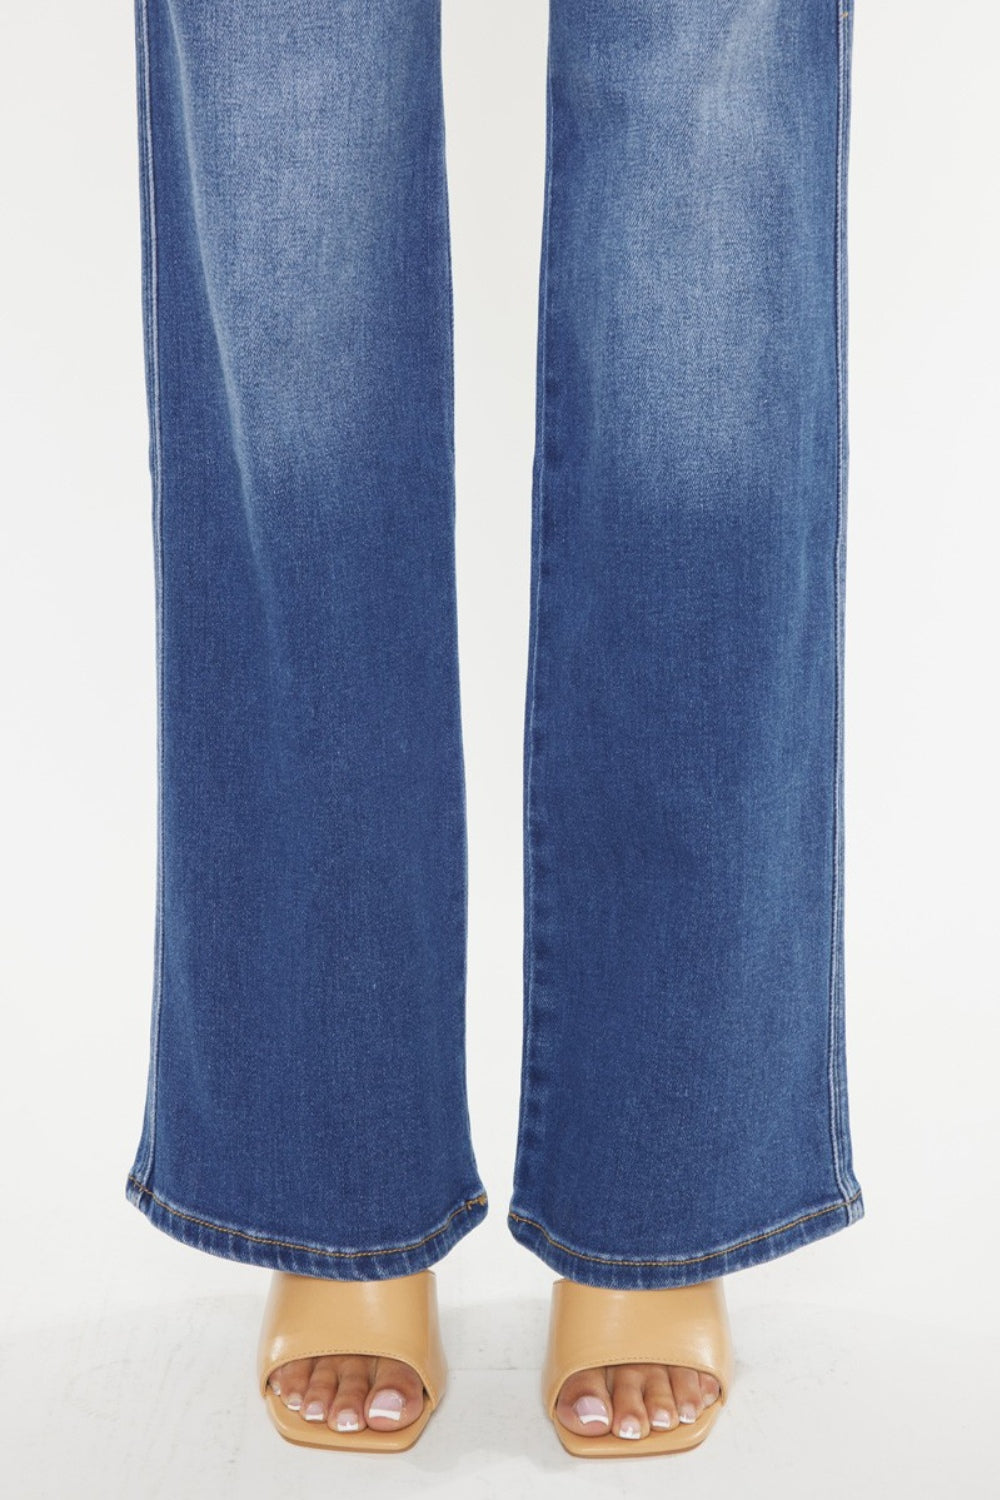 Trendy blue jeans with a wide-leg flare